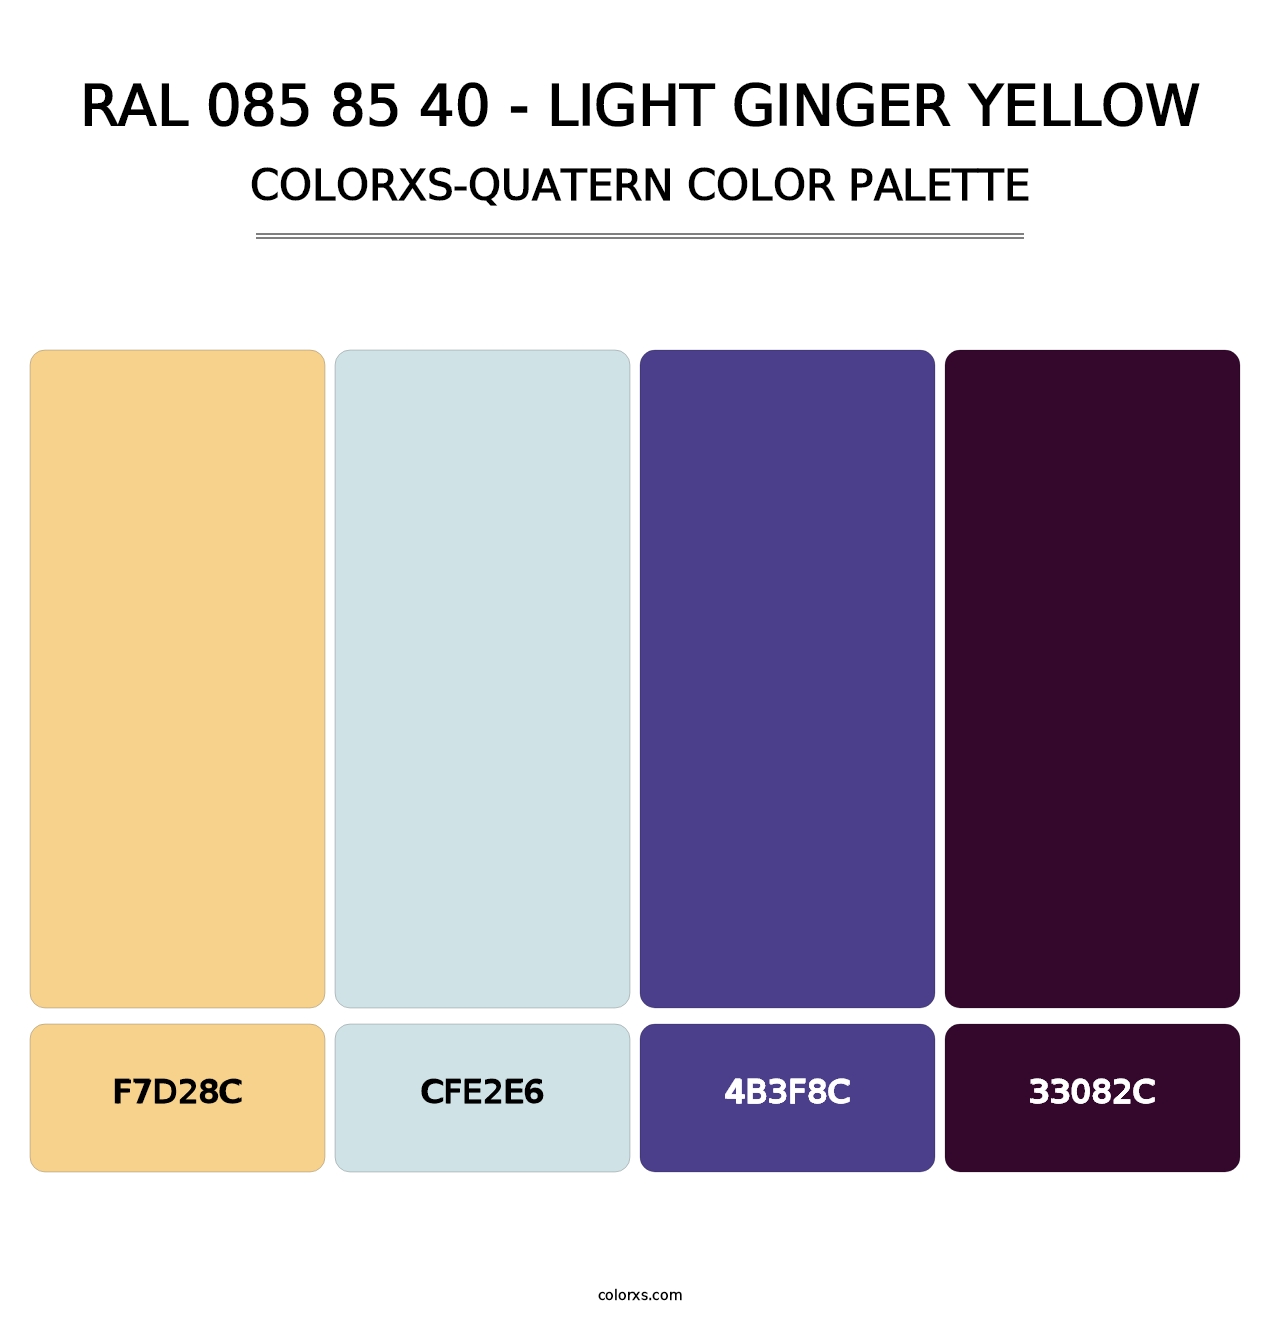 RAL 085 85 40 - Light Ginger Yellow - Colorxs Quatern Palette